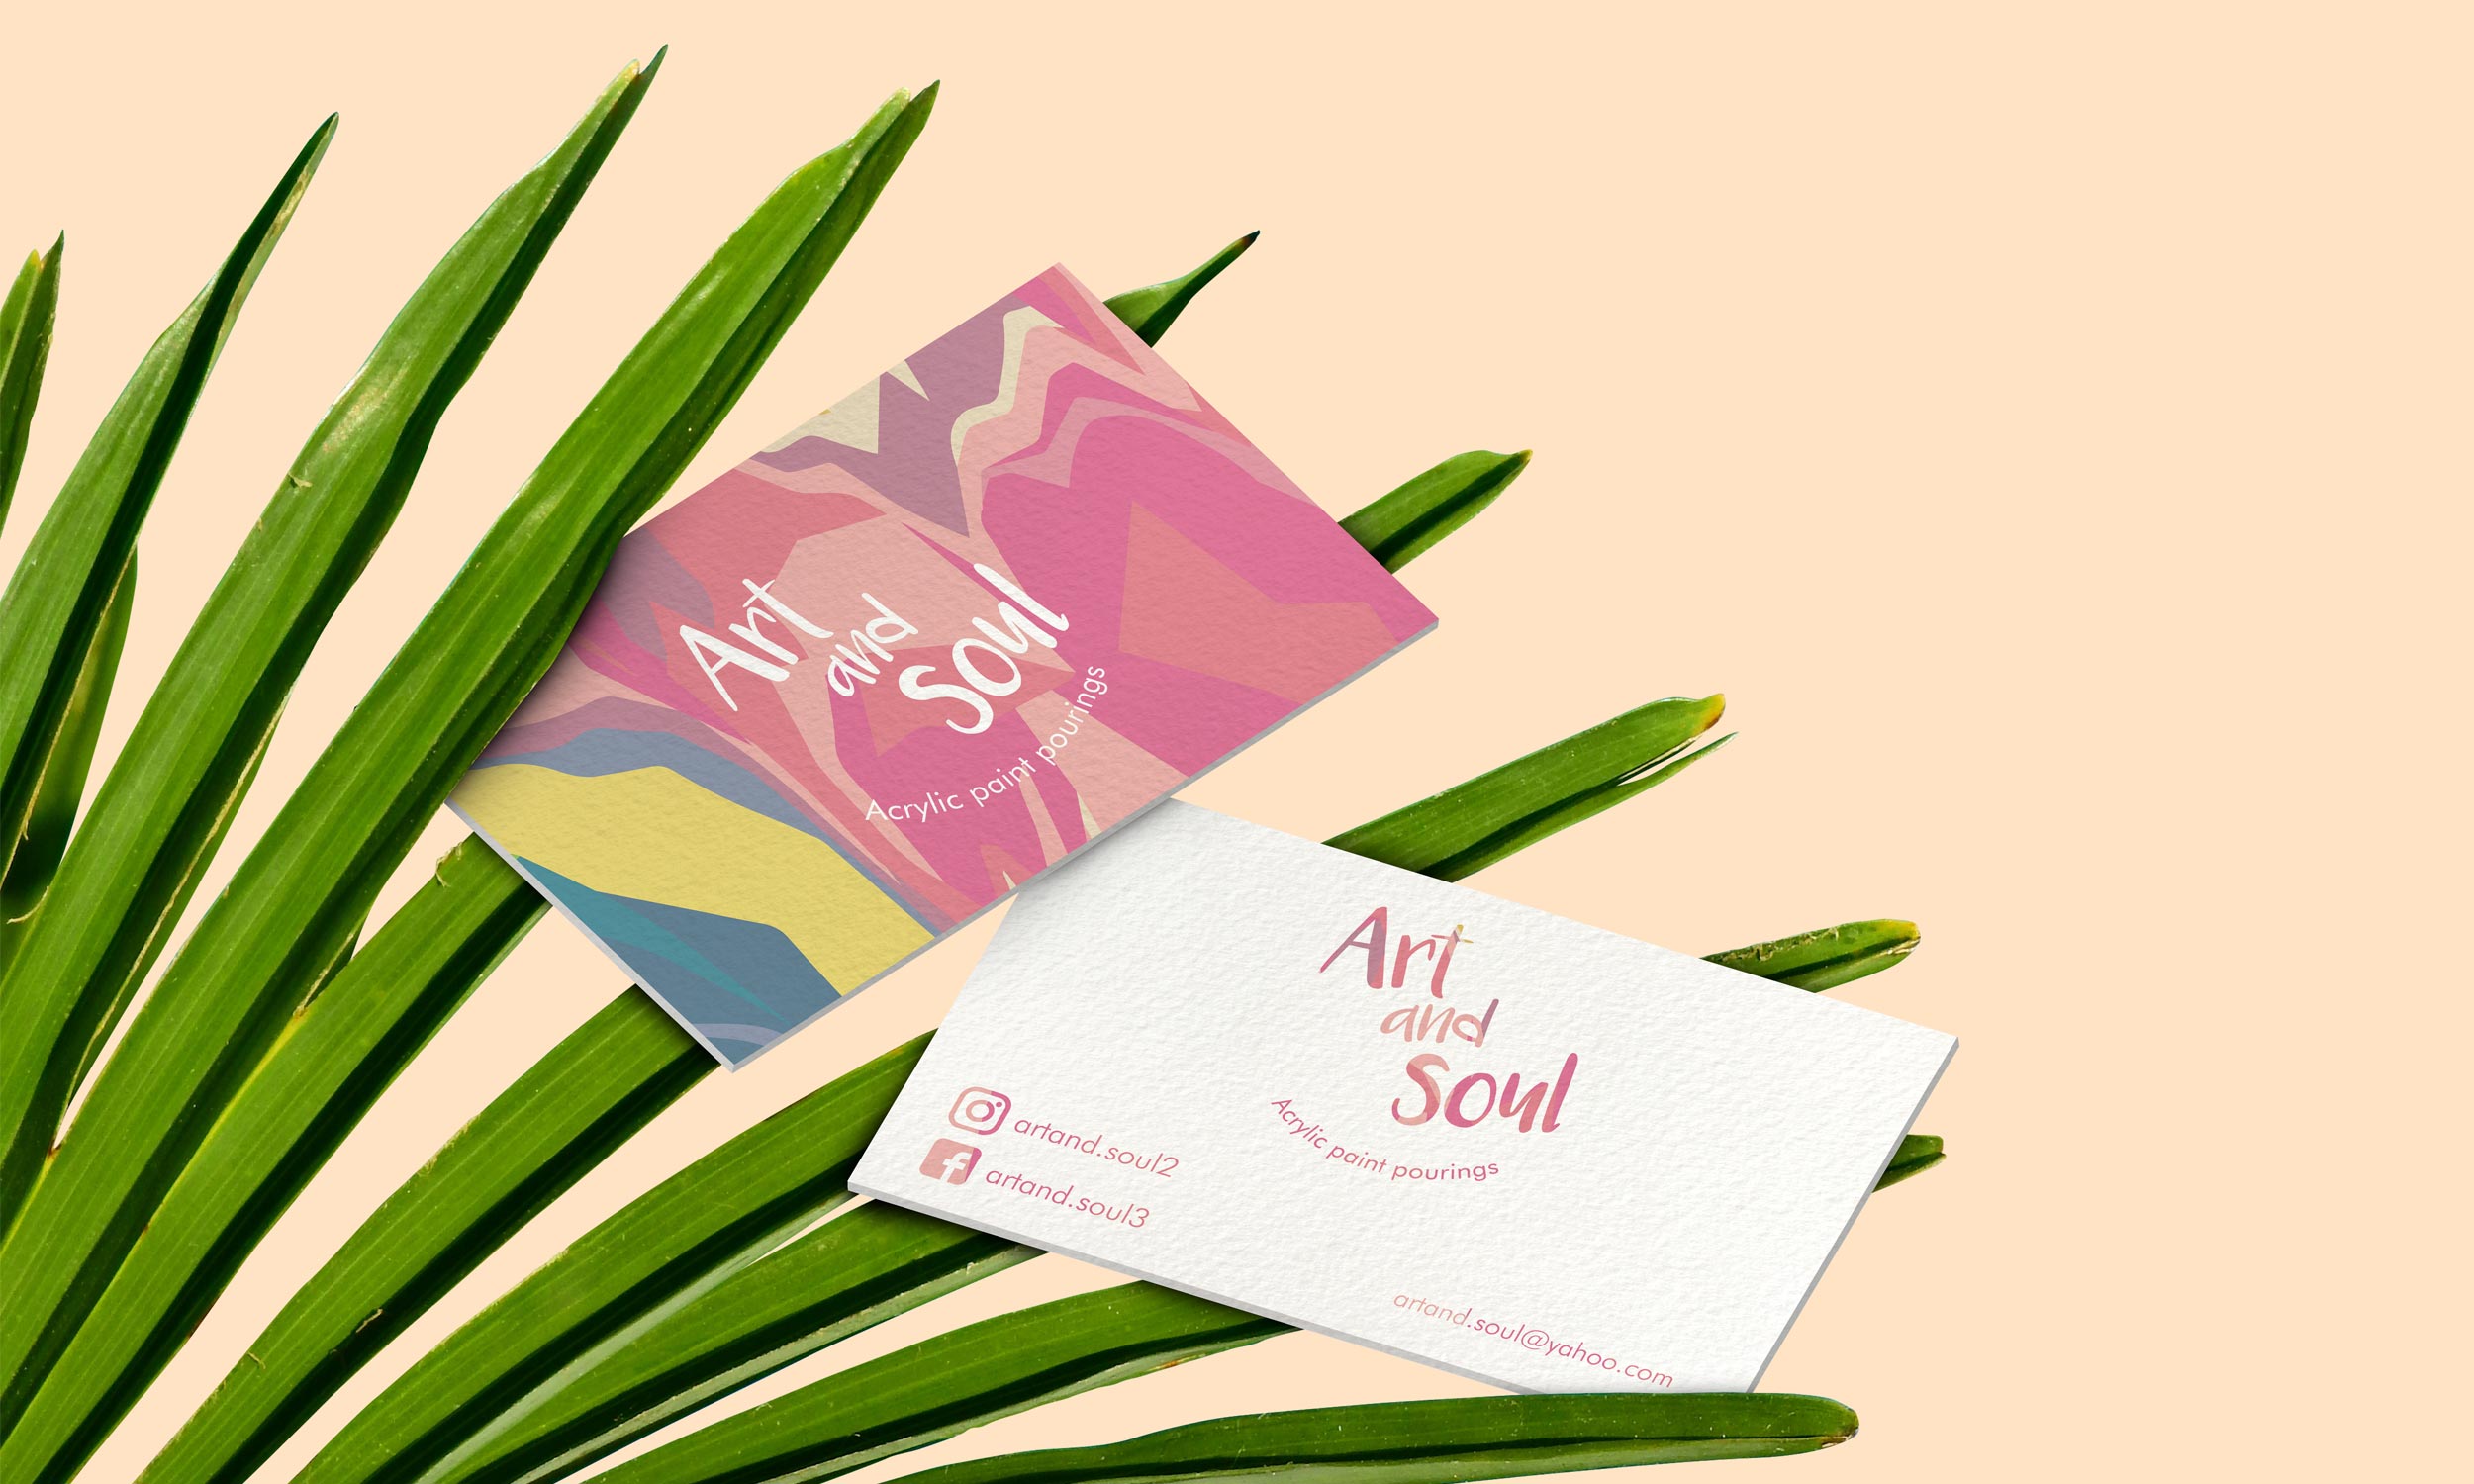 Art and soul – business cards